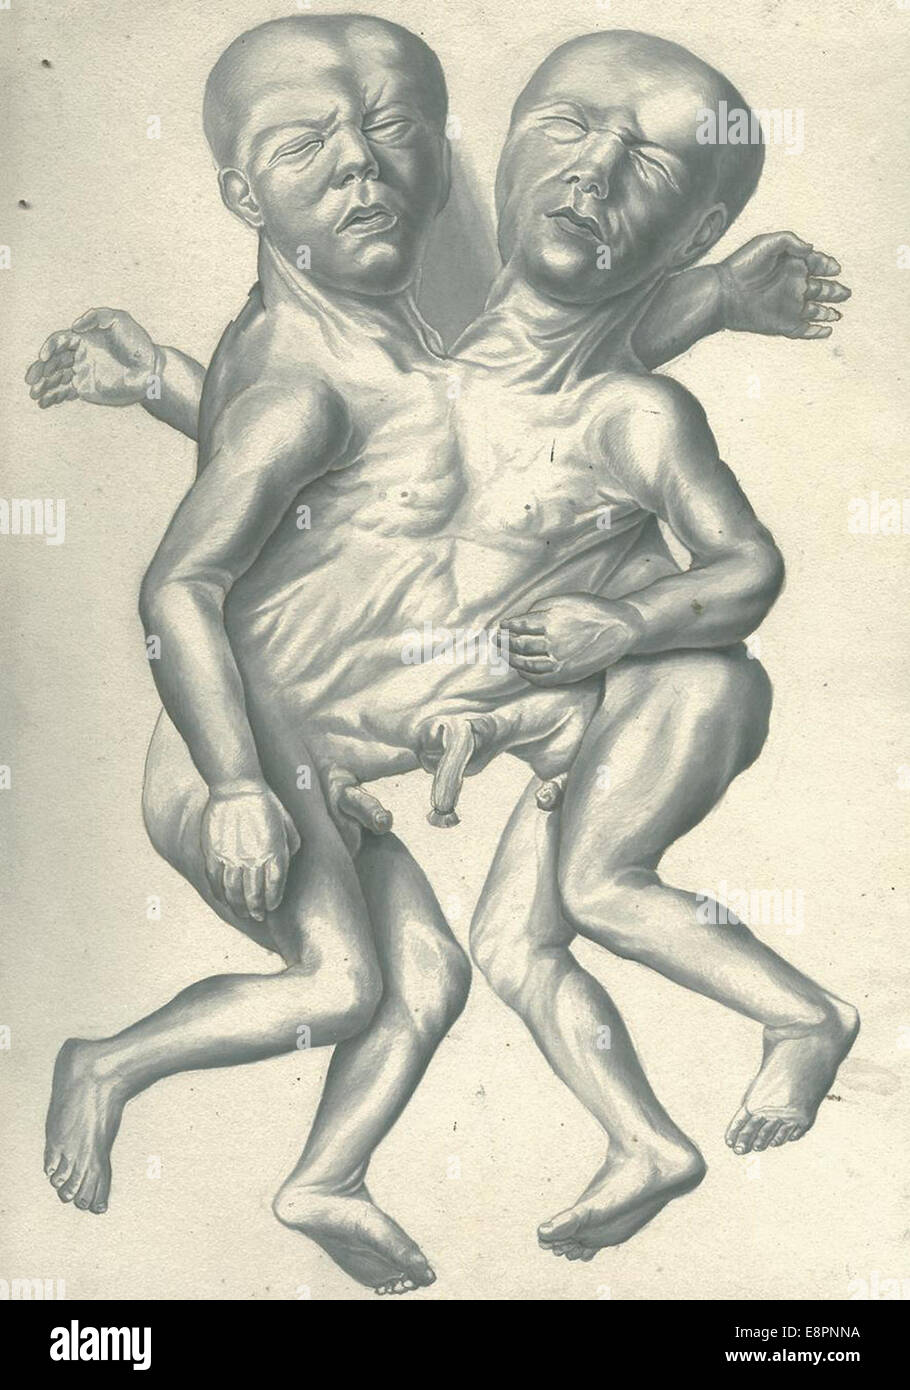 Date: ca. 1820-1840  Image Description: Double-headed conjoined twins. Stock Photo